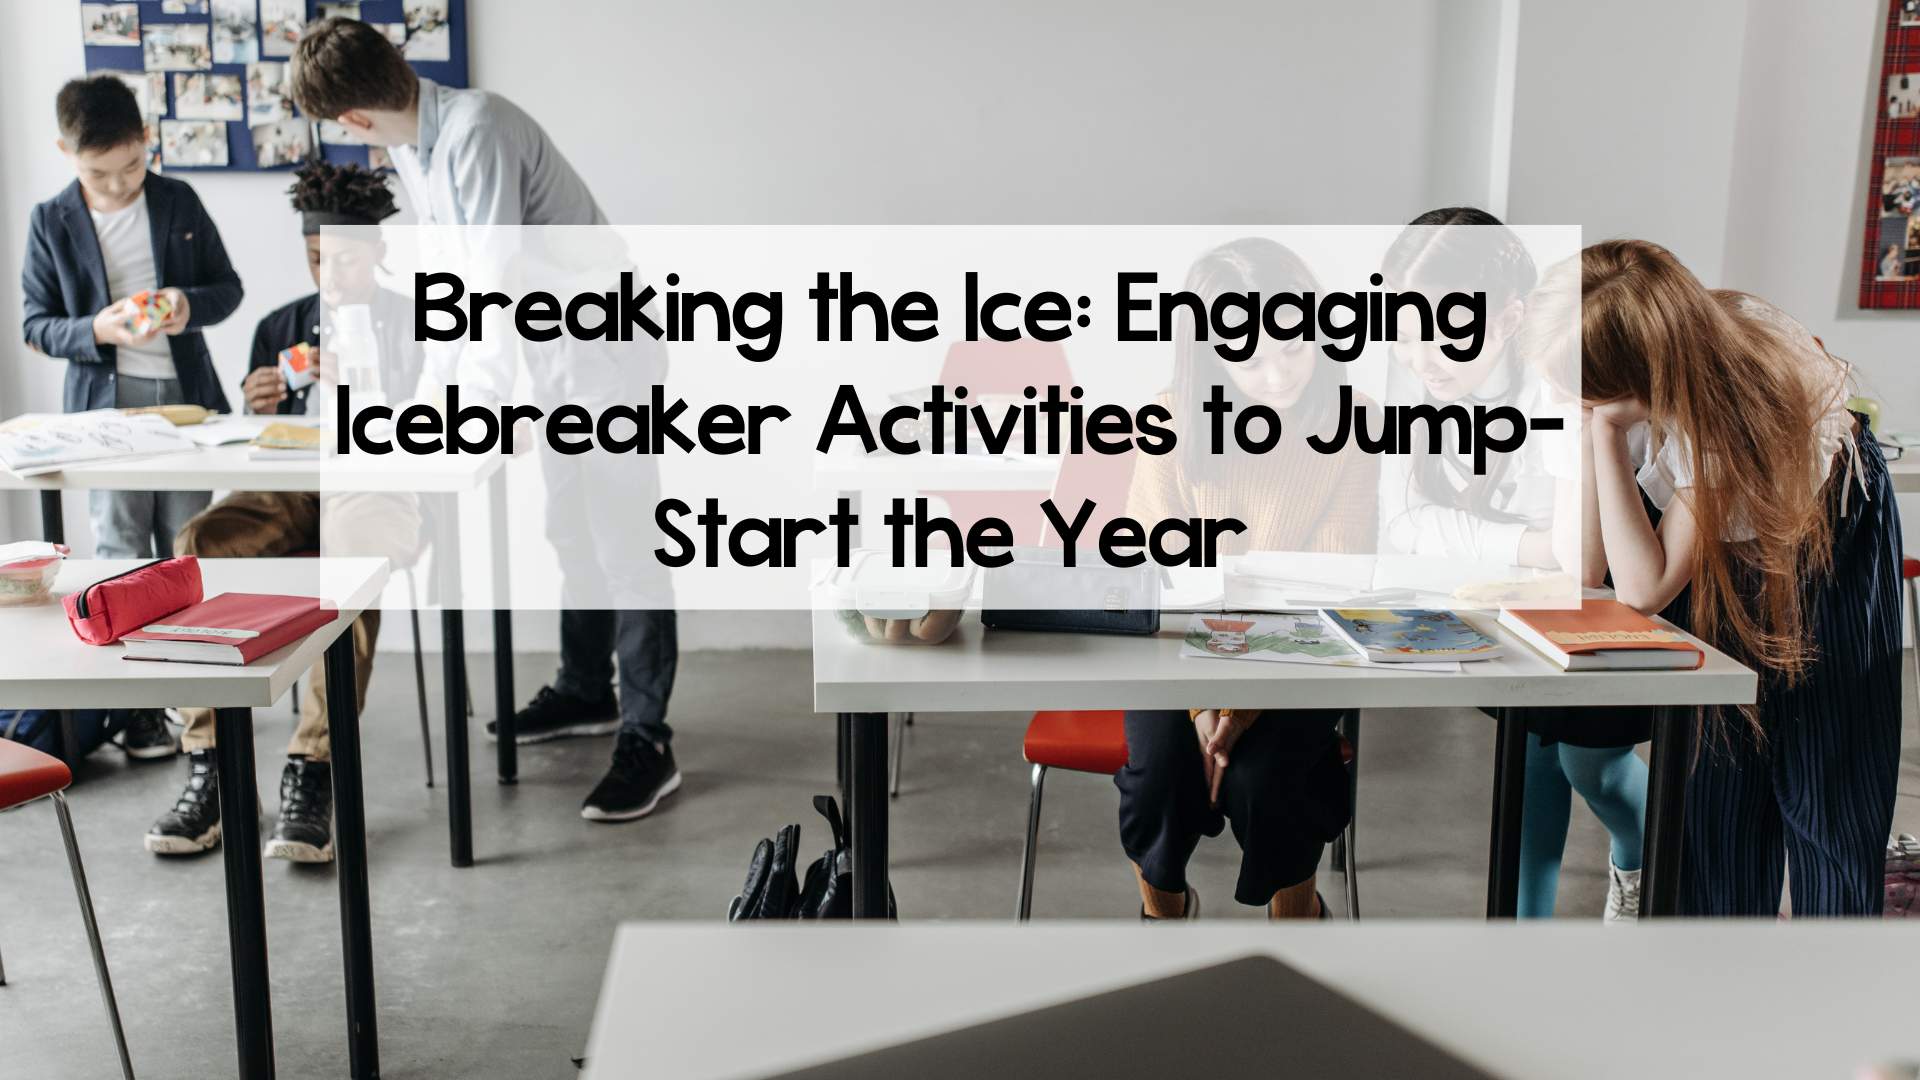 Breaking the Ice: Engaging Icebreaker Activities to Jump-Start the Year